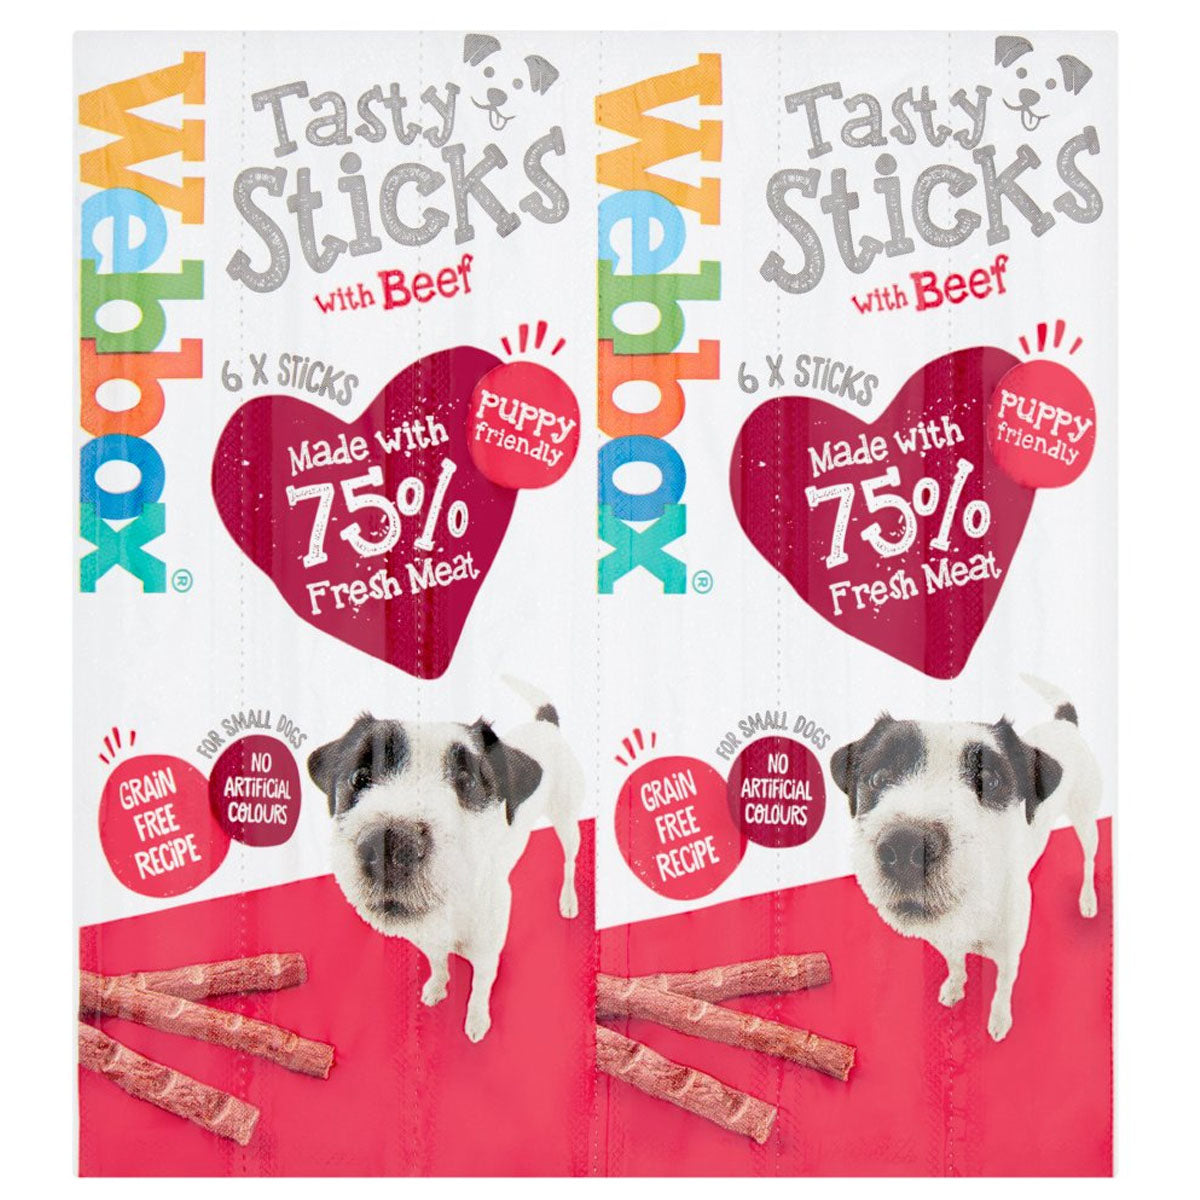 Webbox - Dogs Delight 6 Tasty Sticks with Beef - 30g, pack of 2.